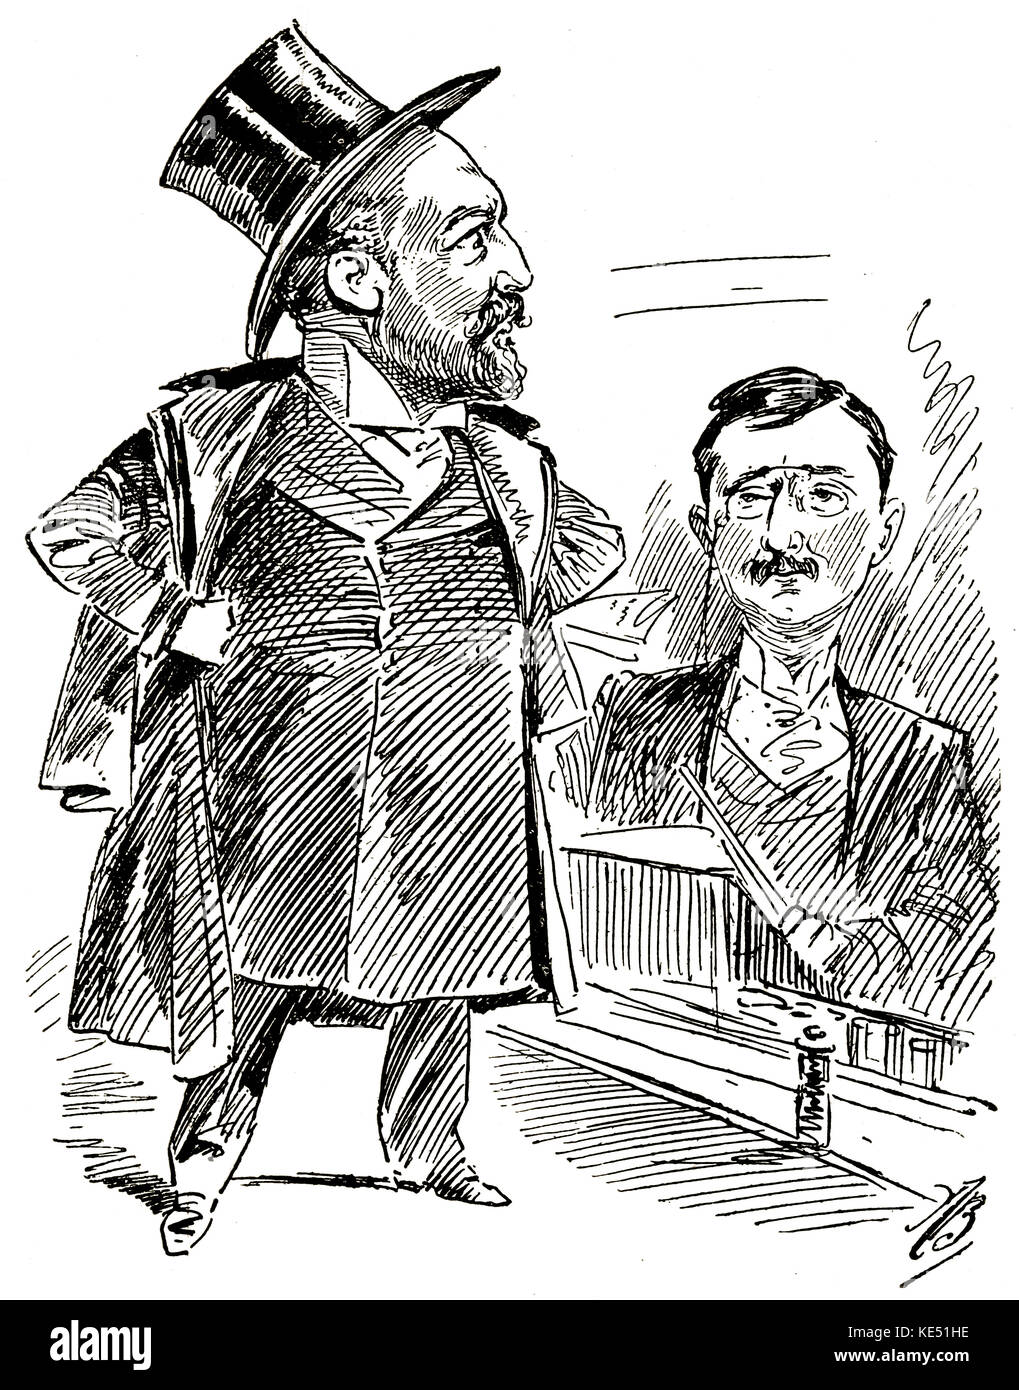 Sir Augustus Harris (also known as Augustus Druriolanus)  - the actor, impresario, and dramatist (on the left) with James 'Michael' Glover. Pantomime rehearsal at the Drury Lane Theatre in London. Caption reads:  'Scene: Drury Lane Stage. Period: Pantomime Rehearsal. Dramatis Personae: Sir Augustus Harris and Mr. James 'Michael' Glover. An occasion when Druriolanus was really annoyed with me'. AH: 1852 - 22 June 1896. Stock Photo